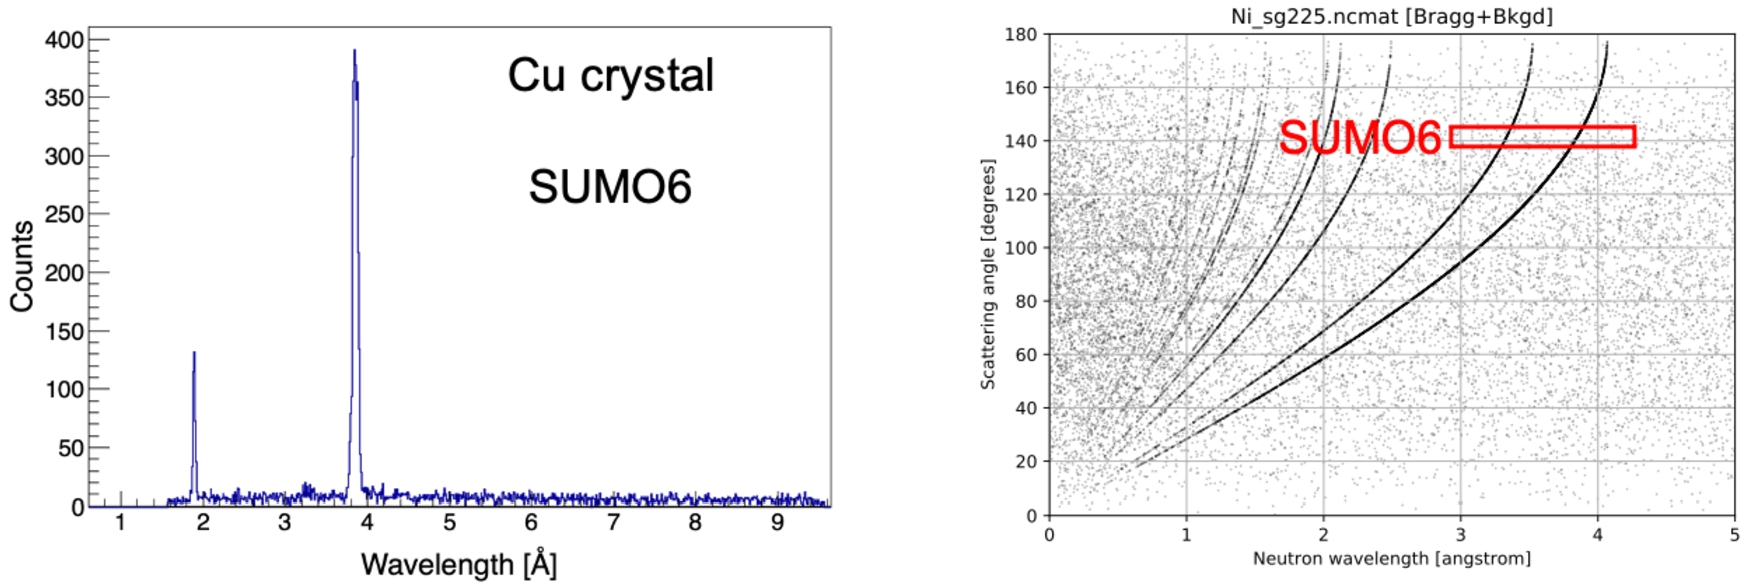 Left: Experimental spectrum obtained from the measurement with the Cu crystal sample with the SUMO6 module of EndCap. The SUMO6 module covered the 2θ angles between 137.5° and 145°. The conversion of the TOF data to the wavelength space was made by using the coordinates of the centers of the detector voxels obtained in the GEANT4 simulation of the detector module. The two Bragg peaks visible in the spectrum are located at 1.89 and 3.85 Å. Right: Scattering angle versus wavelength calculated for the Cu crystal with the NCrystal software package. The scattering angles covered by SUMO6 are marked by the red square.